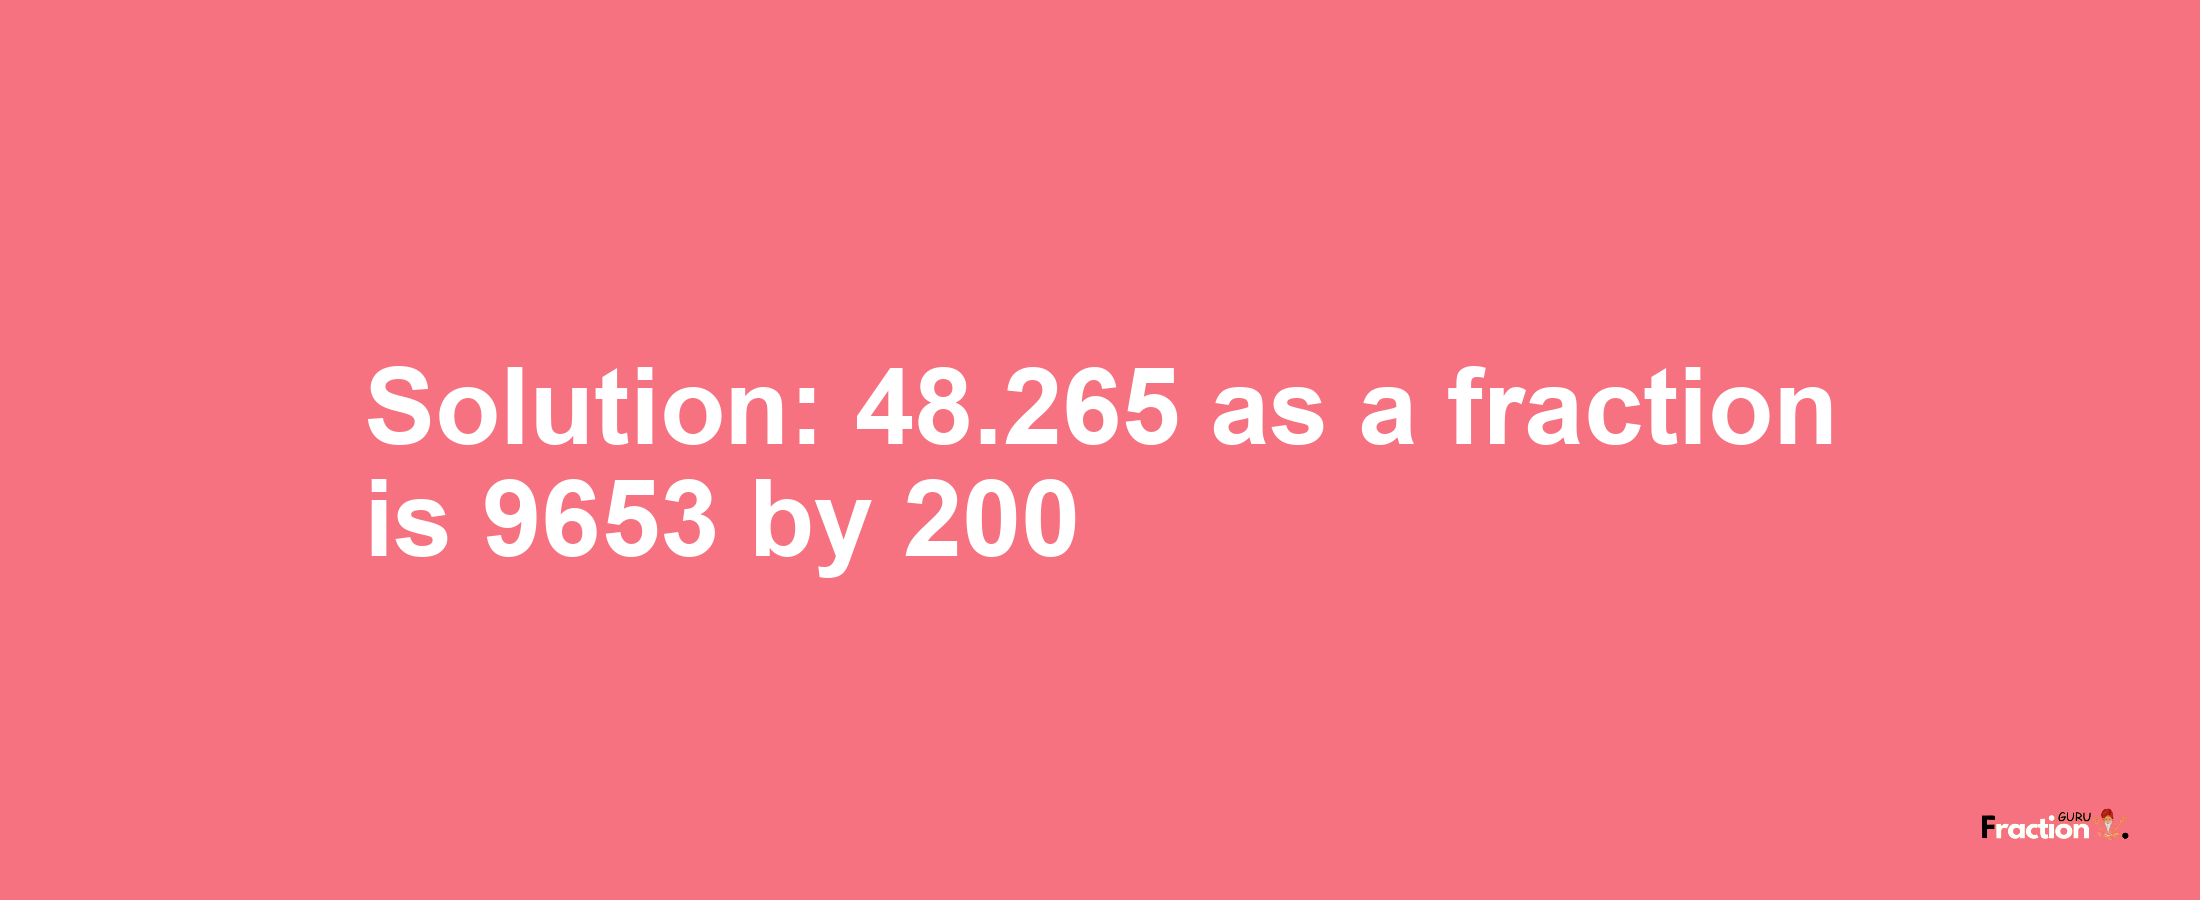 Solution:48.265 as a fraction is 9653/200